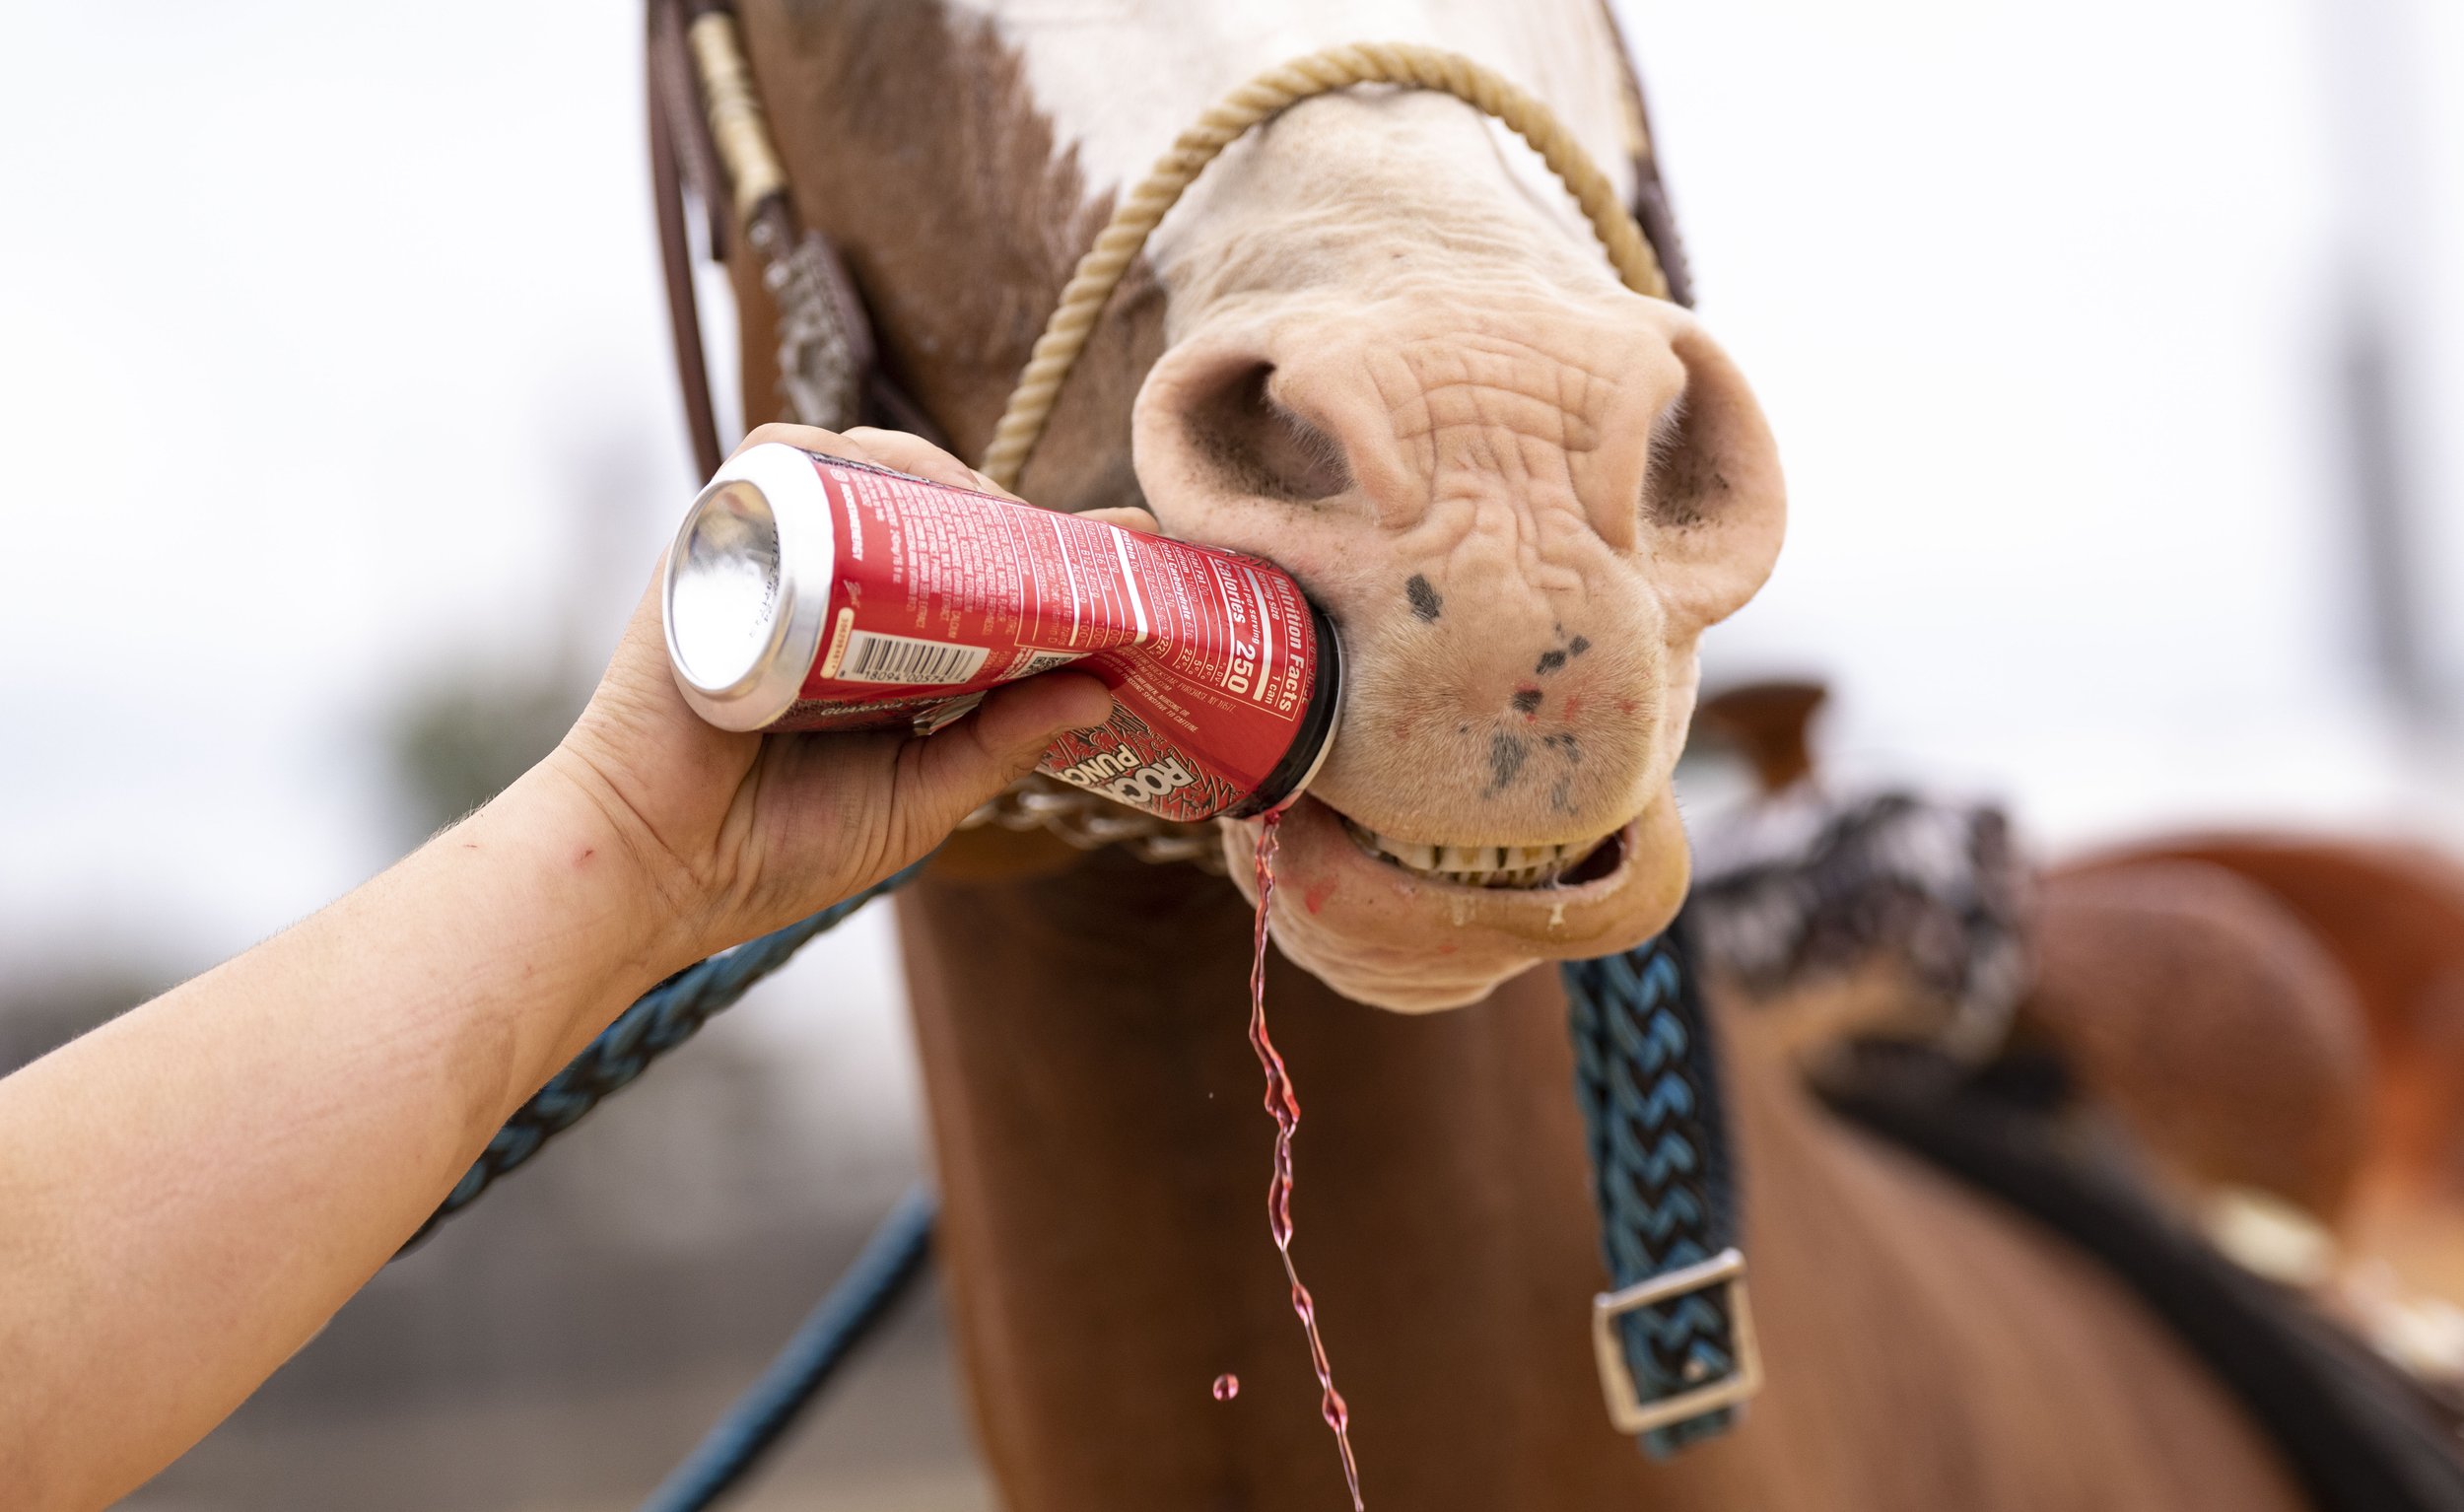  A horse is given a sip of a drink during a practice at the Show Place Arena, in Upper Marlboro, MD. 